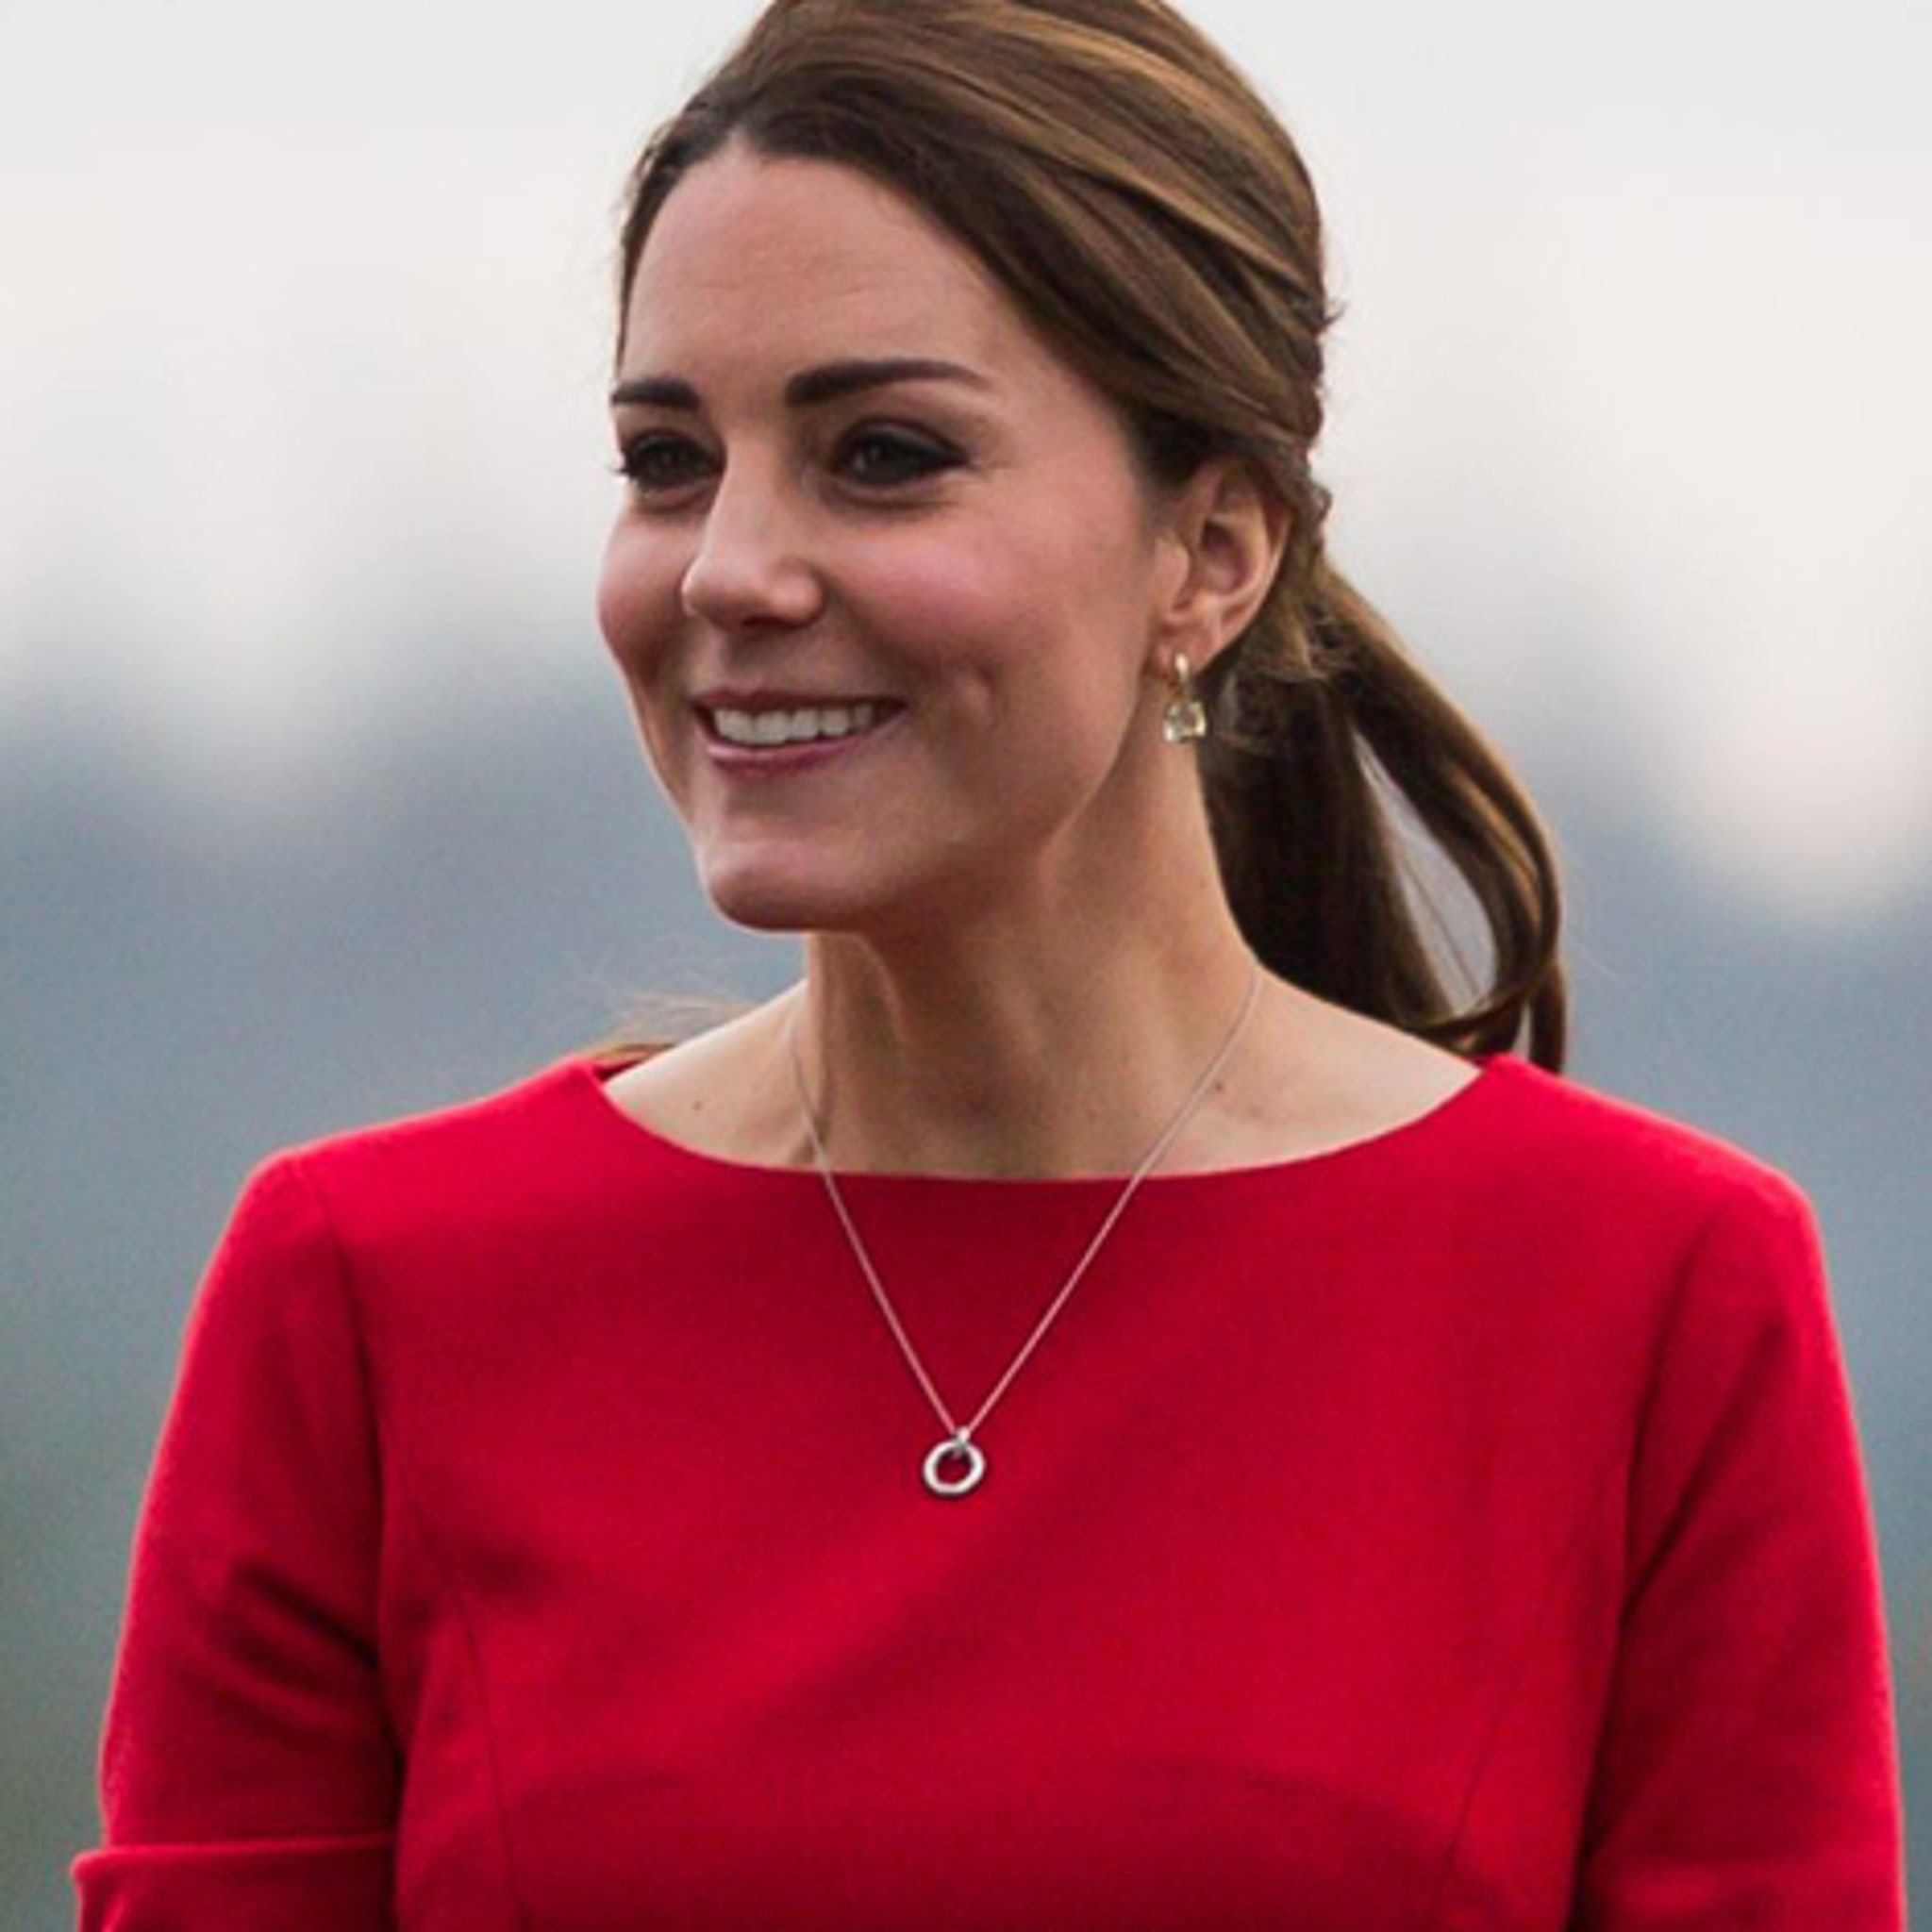 Kate Middleton Conceals Her Baby Bump in Chic Red Dress